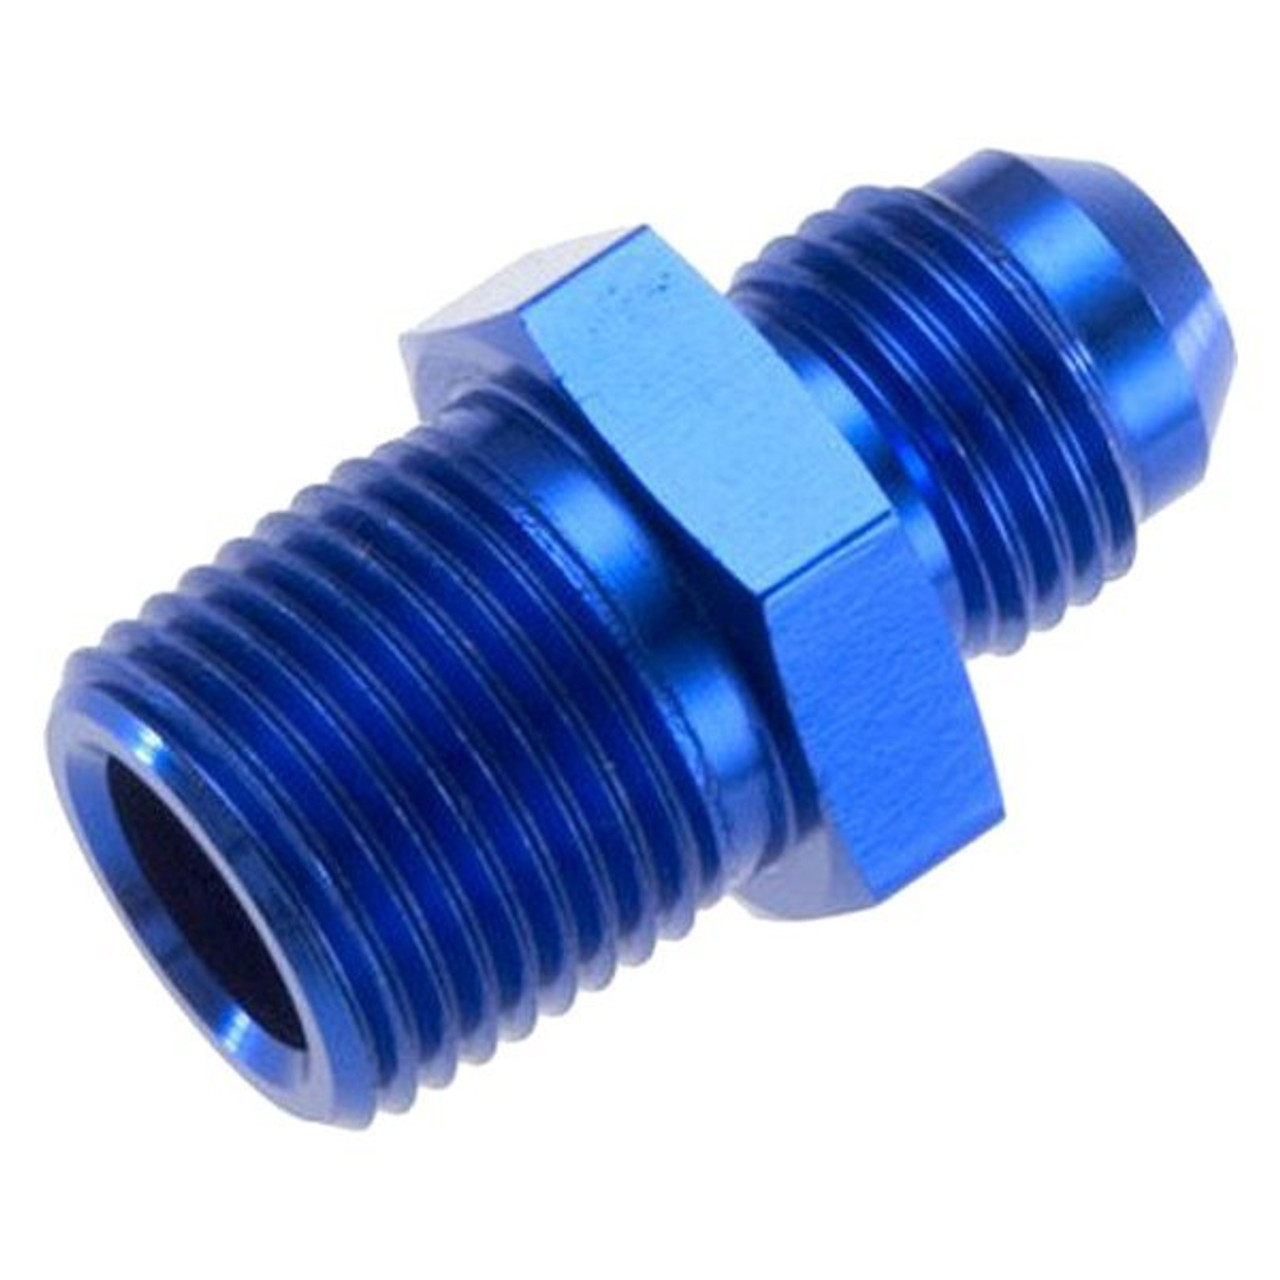 RHP816-06-02-1, Straight Male Adapter  -06 straight male adapter to -02 (1/8